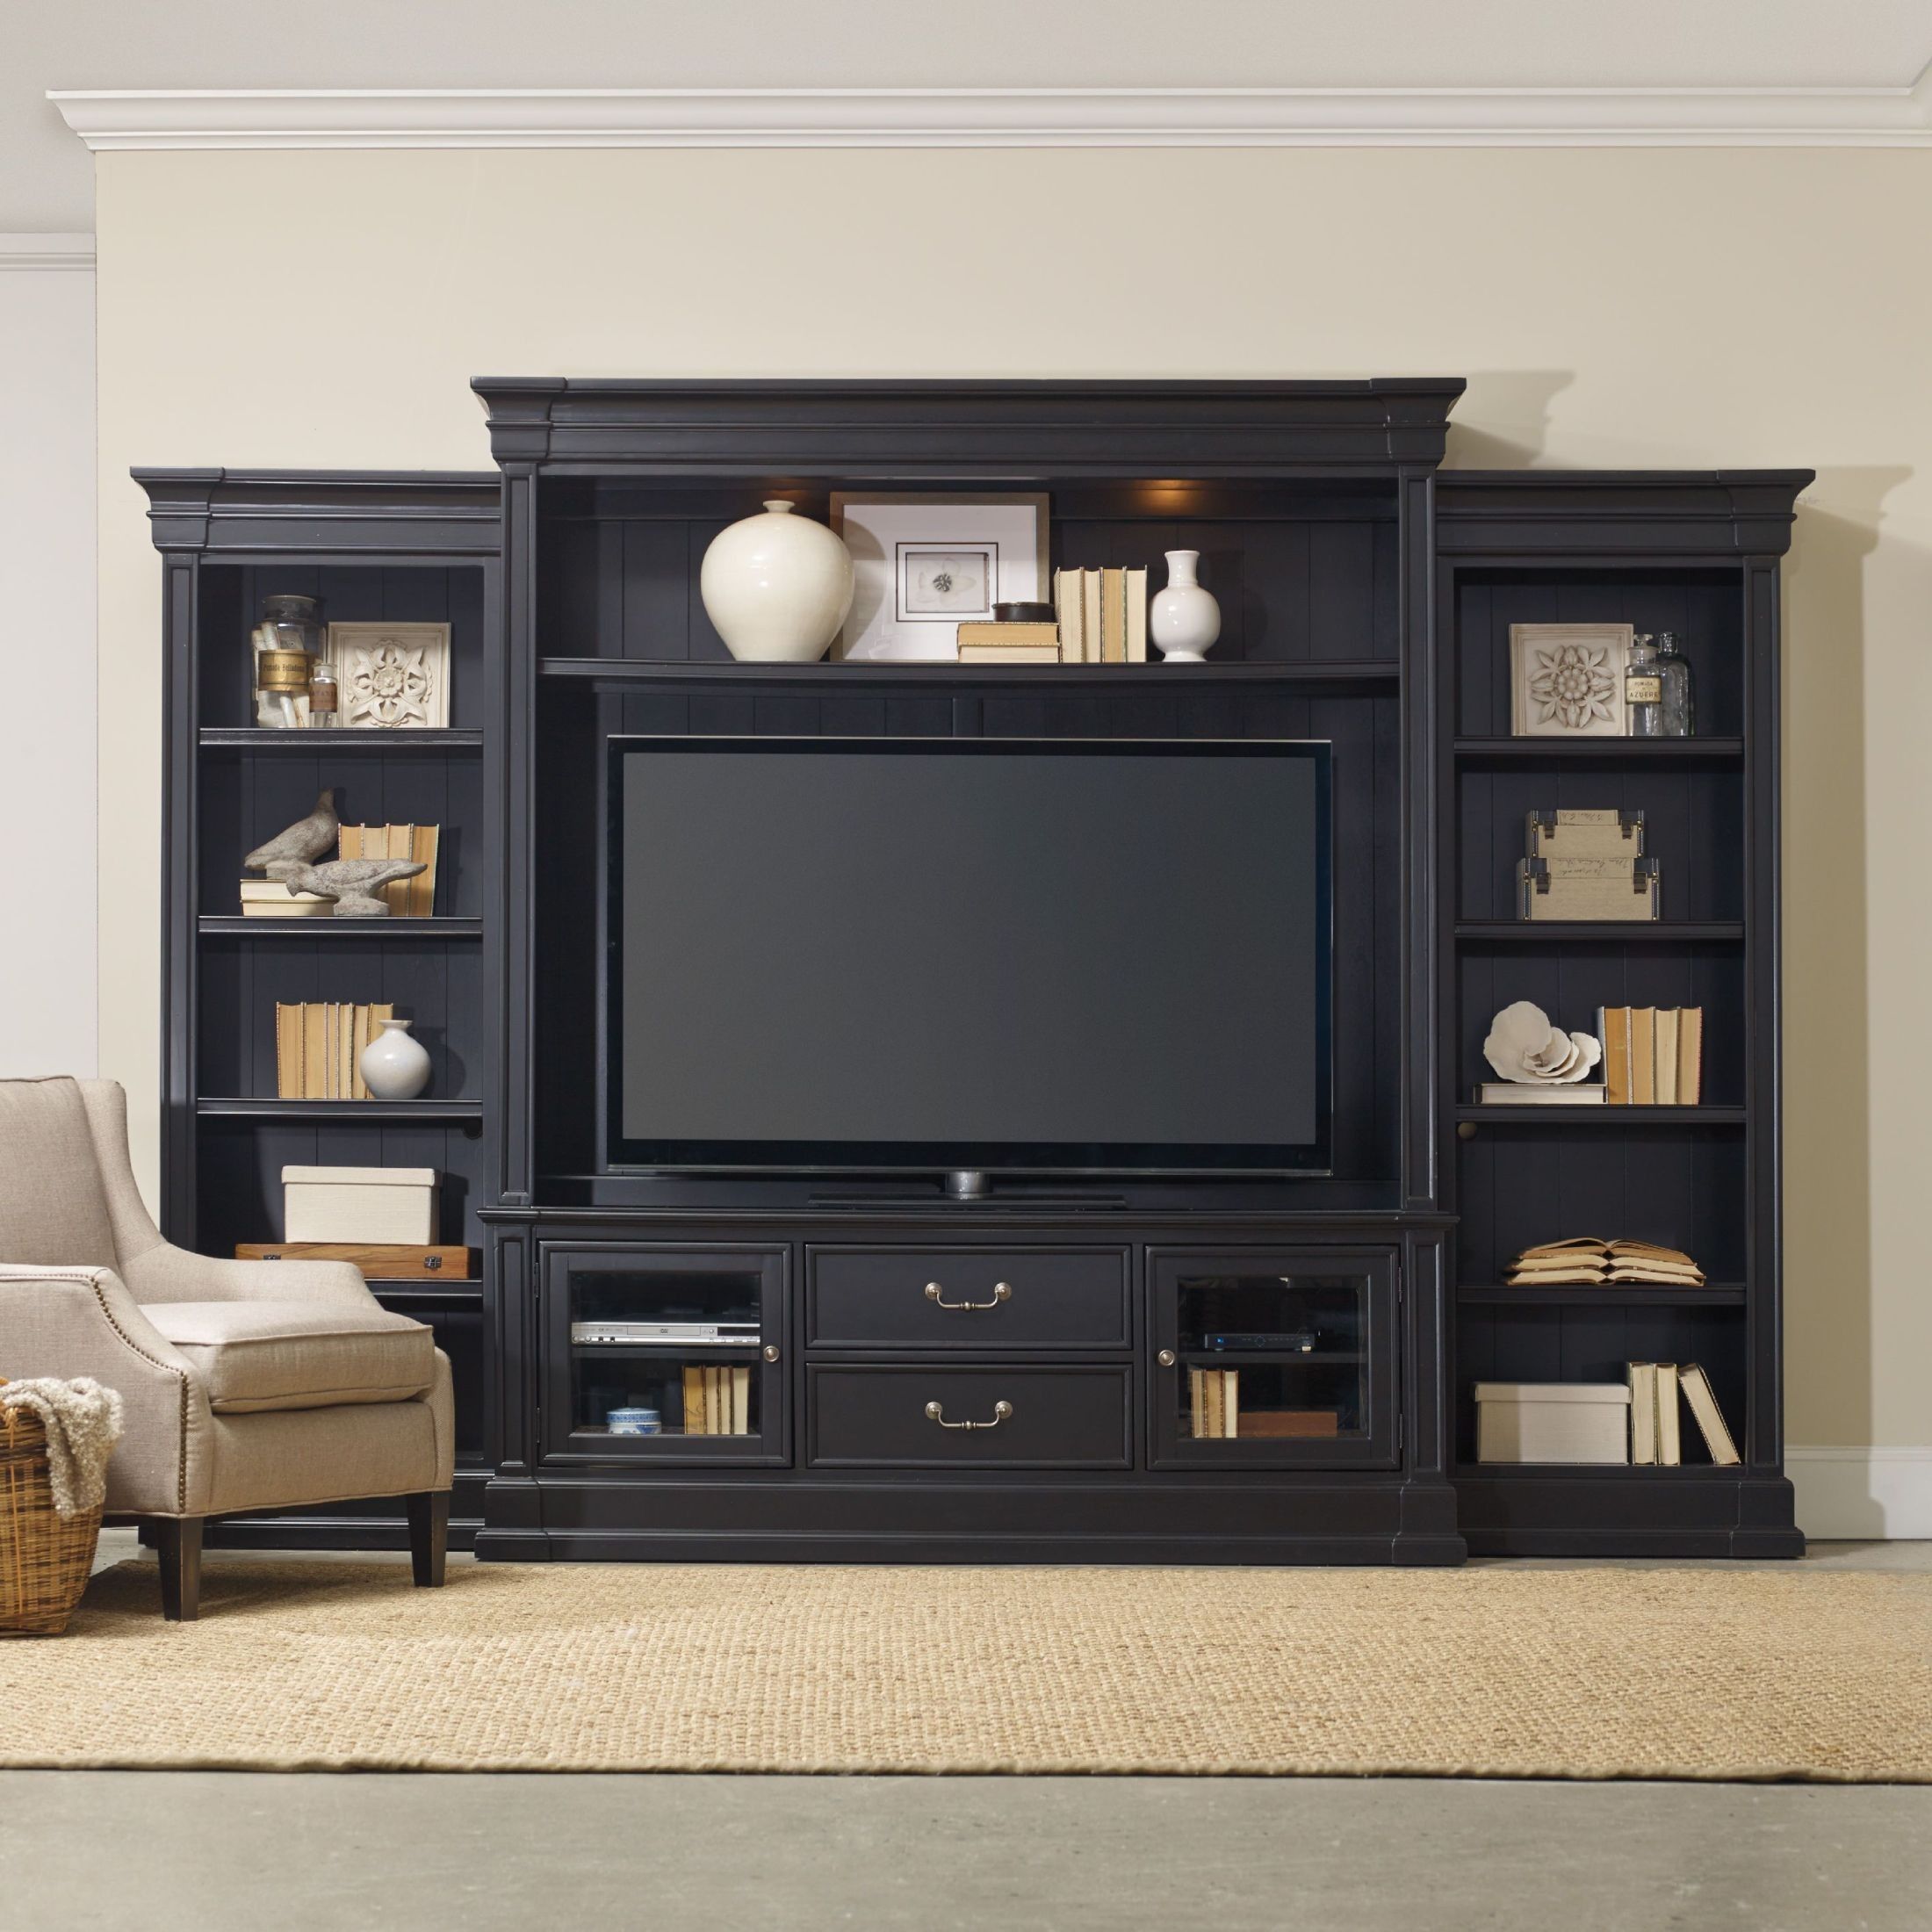 Clermont Black Entertainment Wall Unit, 5371 70222, Hooker Furniture Inside Black Rgb Entertainment Centers (View 13 of 20)